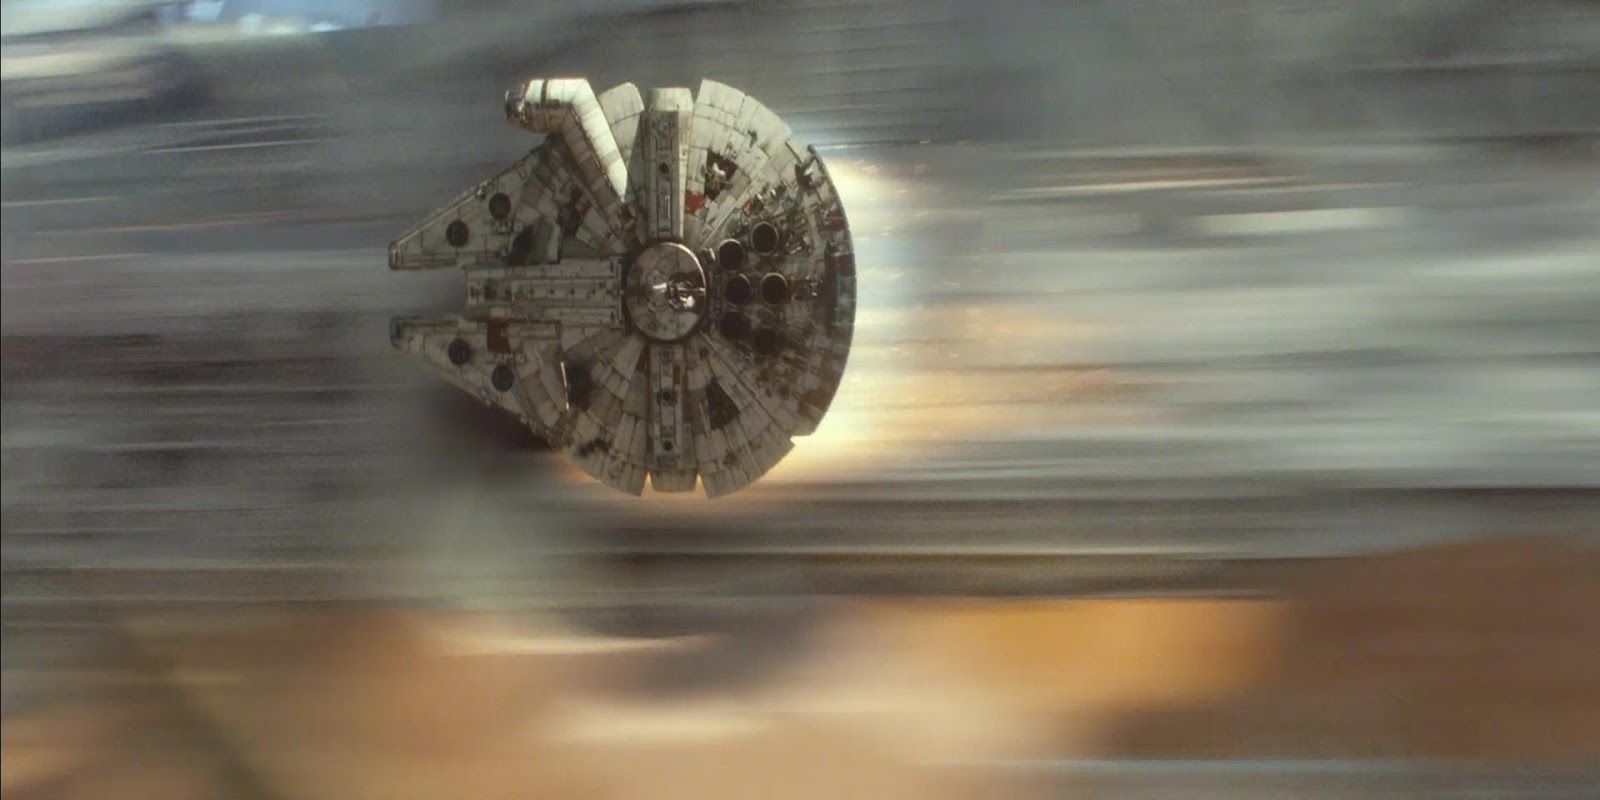 Star Wars The 10 Most Feared Ships In The Galaxy Ranked